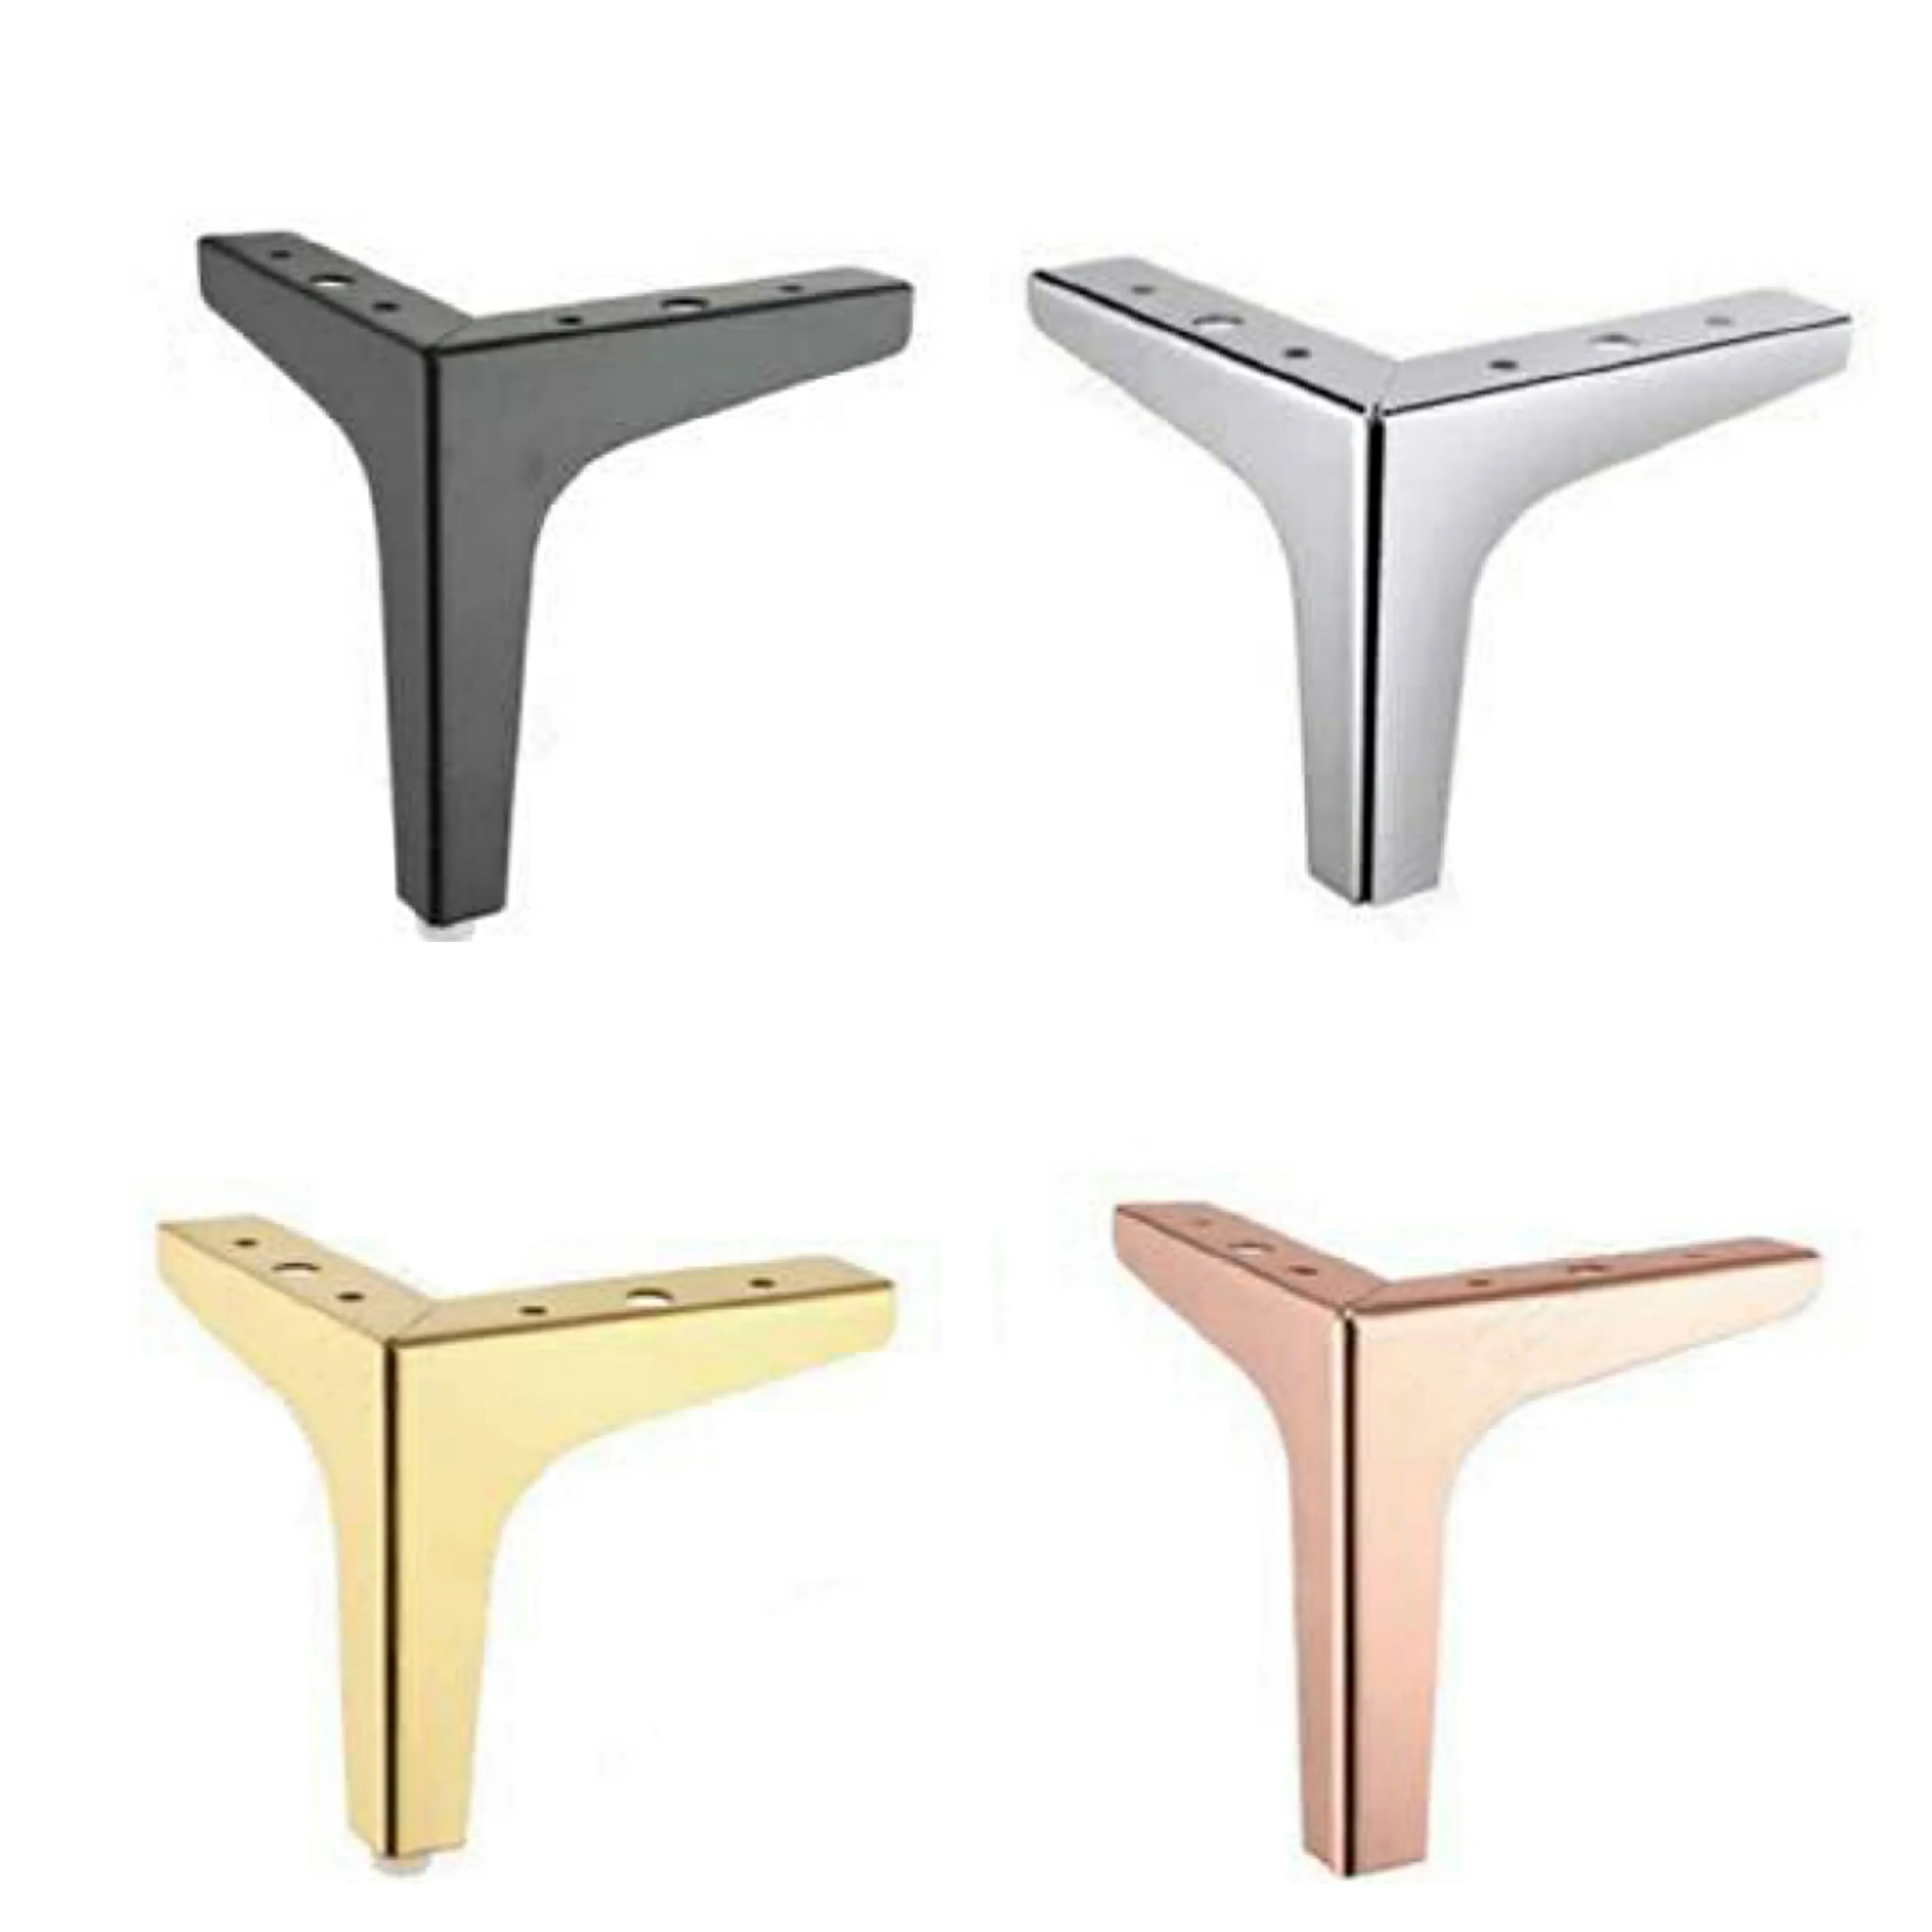 In Stock Wholesale Chrome Metal Pink Gold Coffee Table Legs Modern Sofa Legs Cabinet Legs For Bed And Bathroom